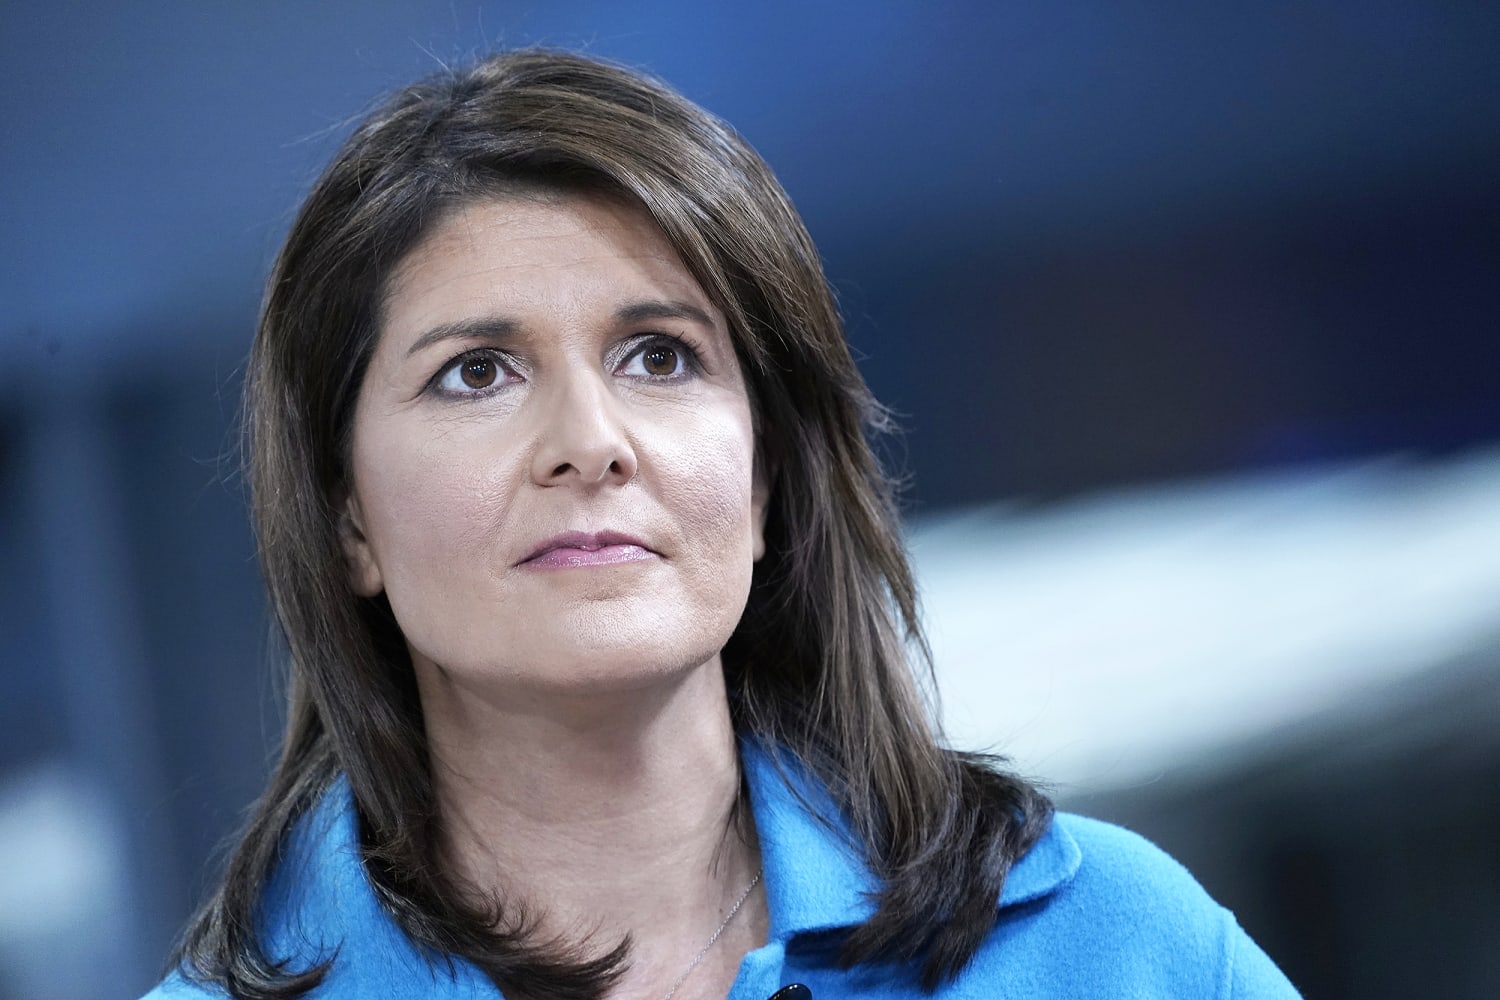 Nikki Haley expected to formally announce presidential bid on Feb. 15, sources say